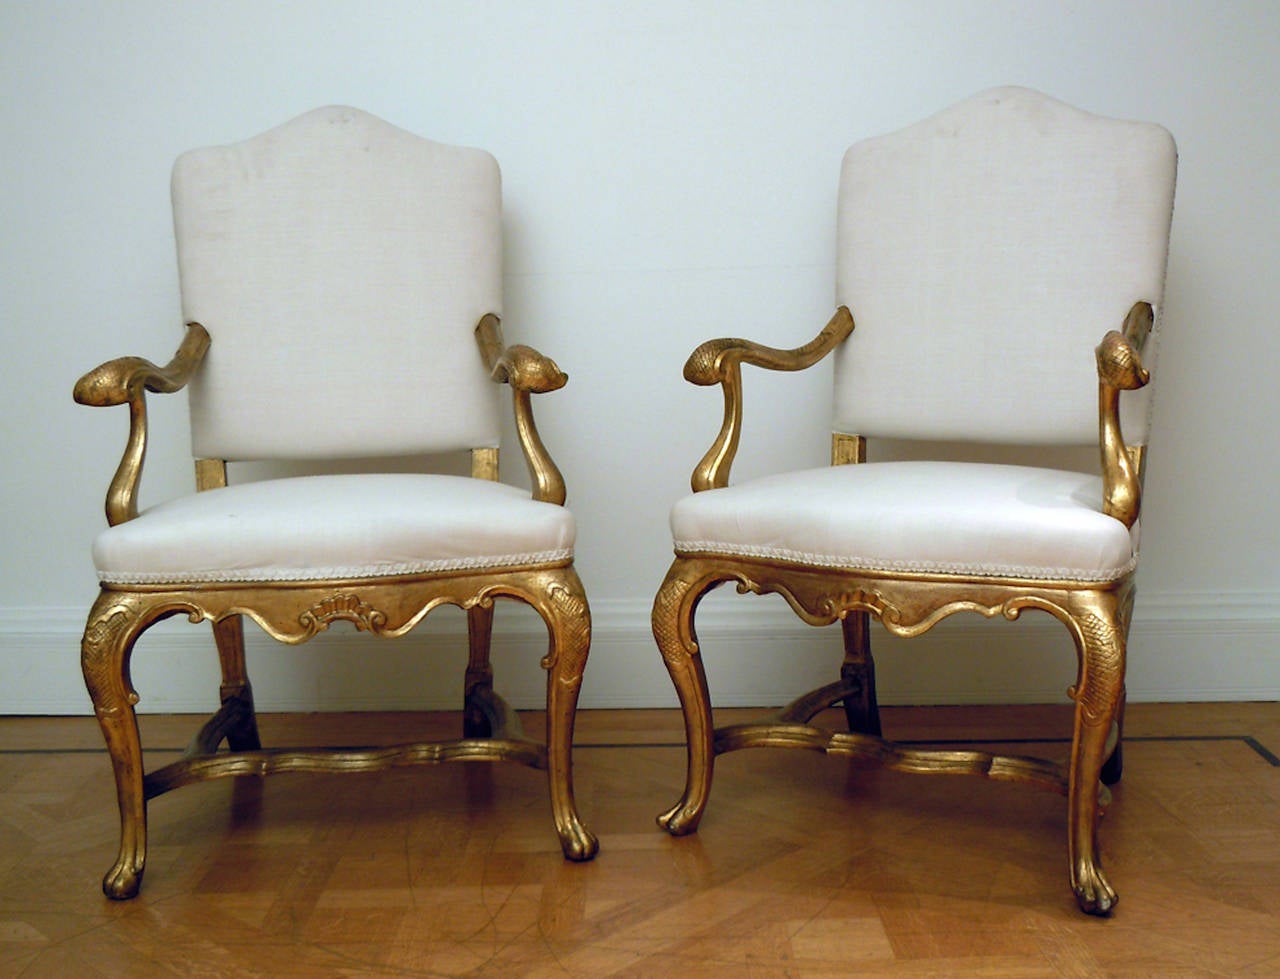 A fine pair of mid-18th century carved and giltwood Venetian armchairs with inverted bellflower carvings to the knees, shaped stretchers and curved arms, circa 1750. Venice.